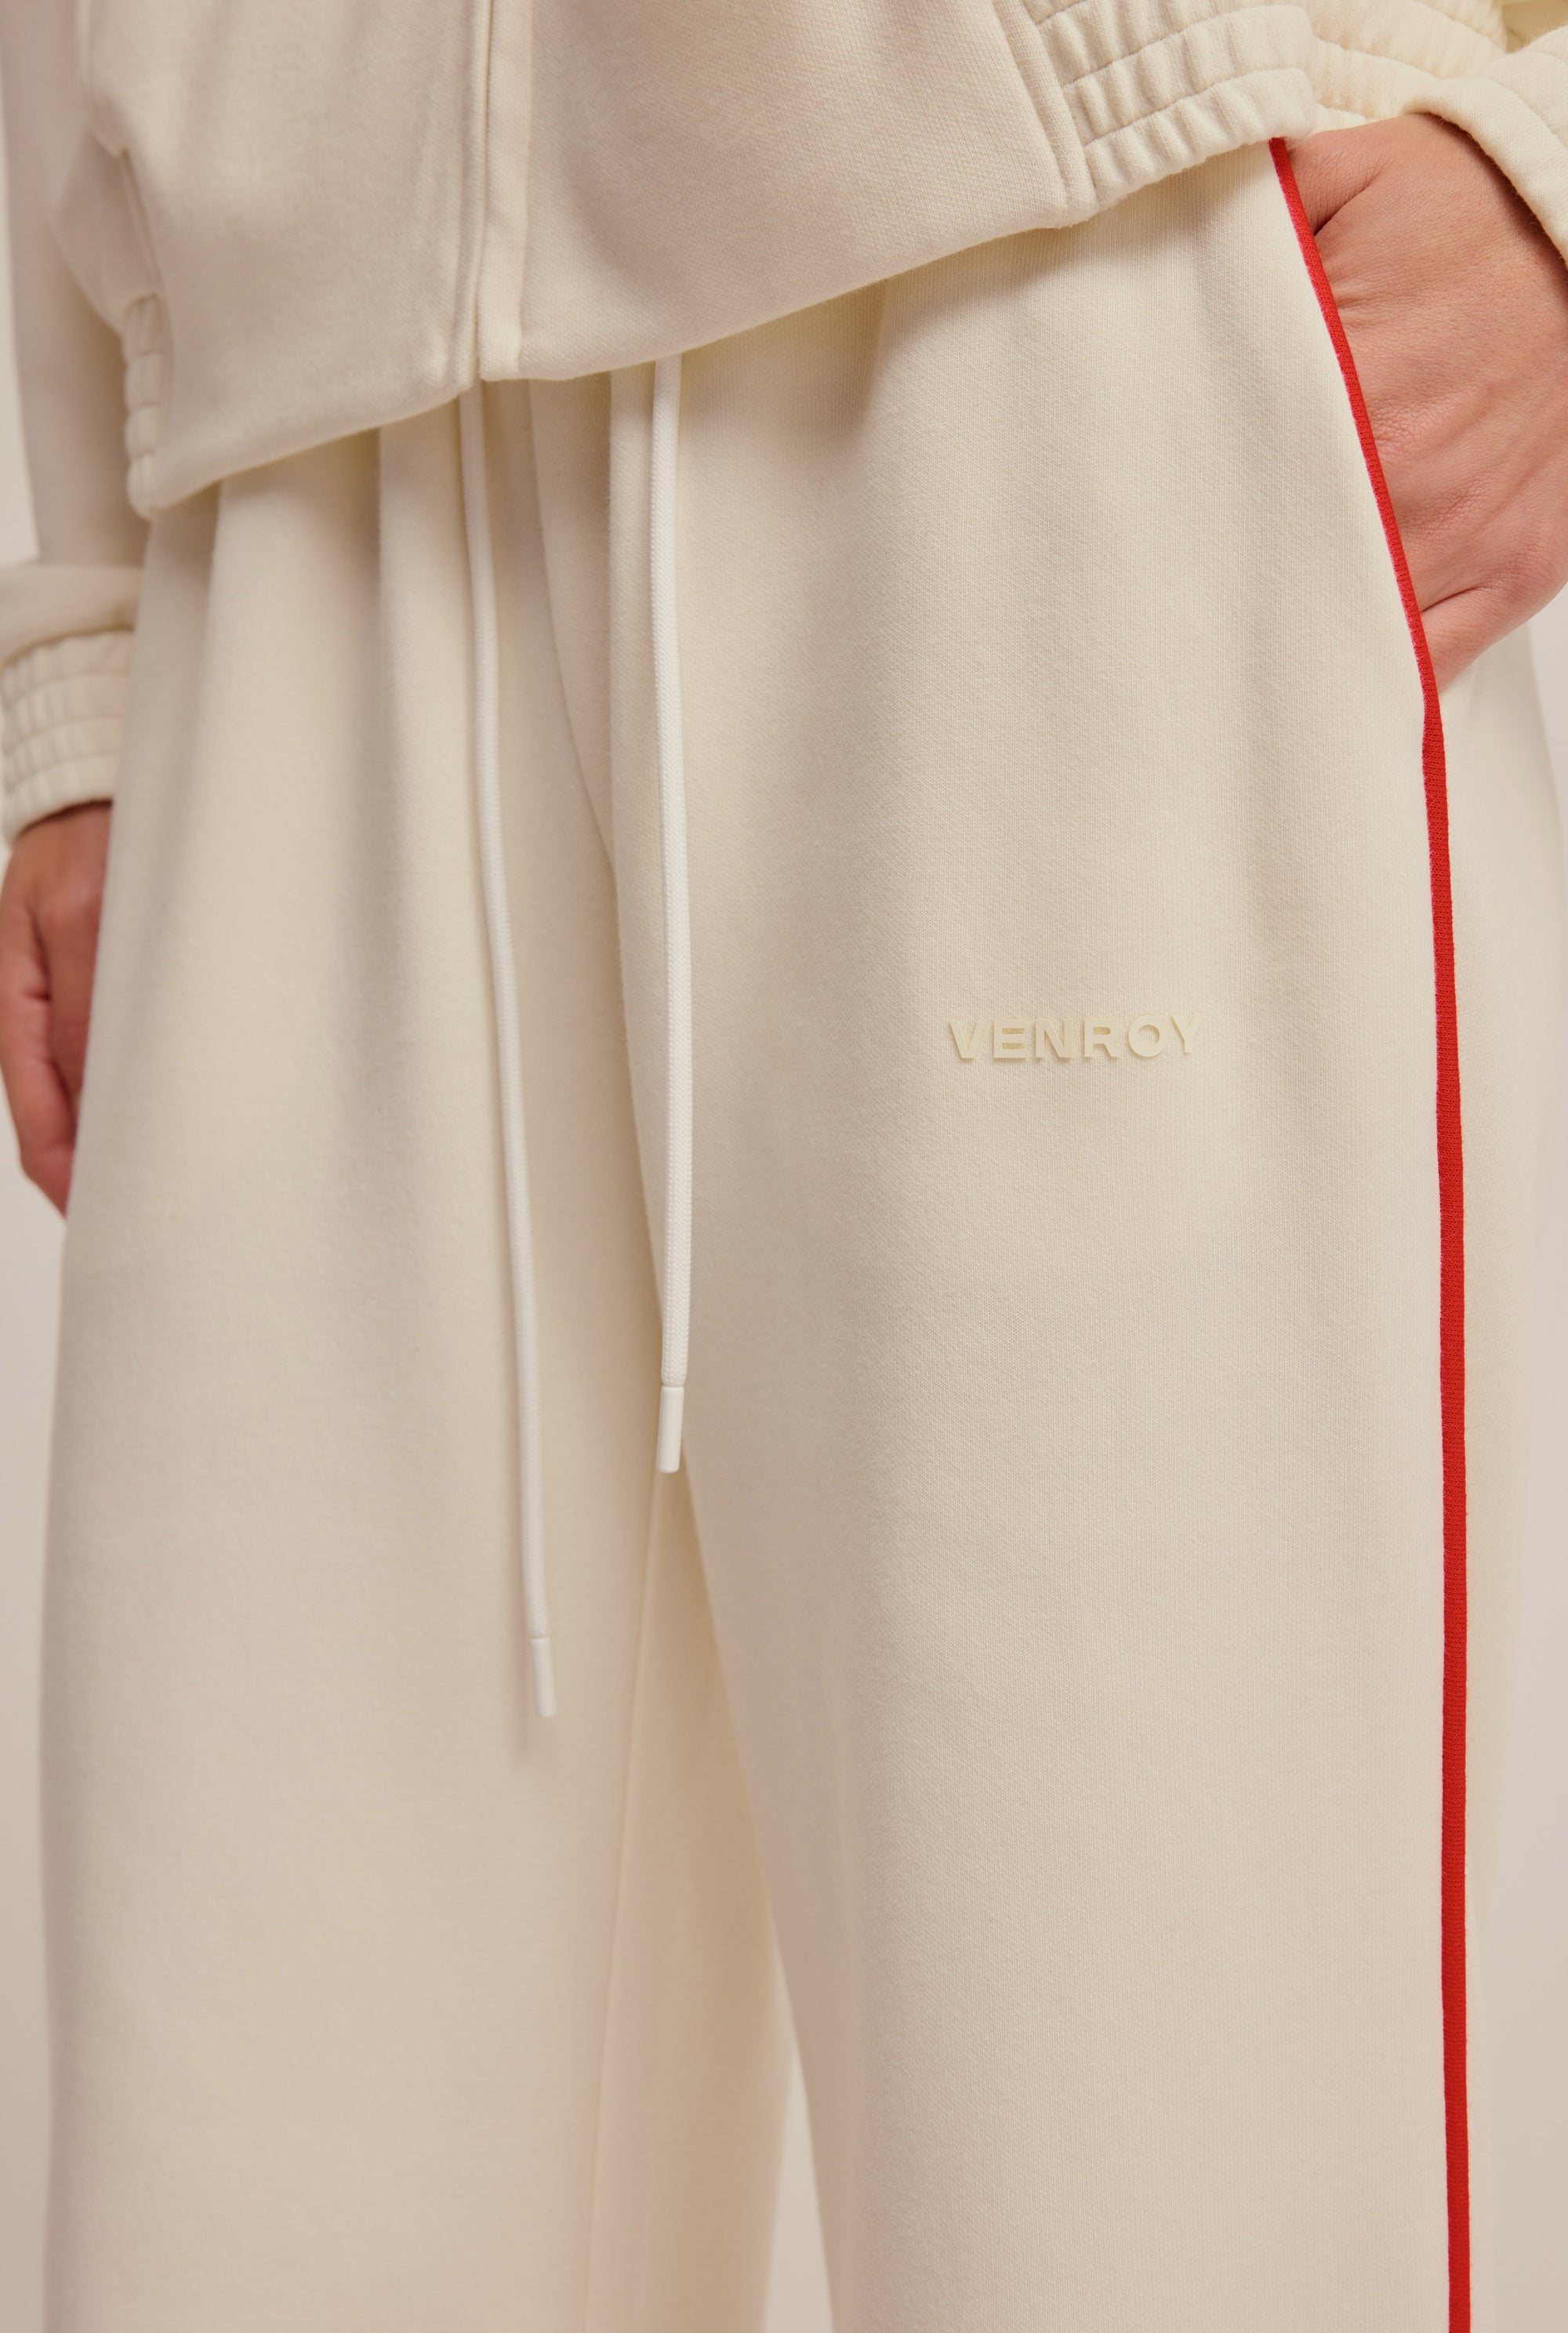 Wide Leg Track Pant - Cream/Red